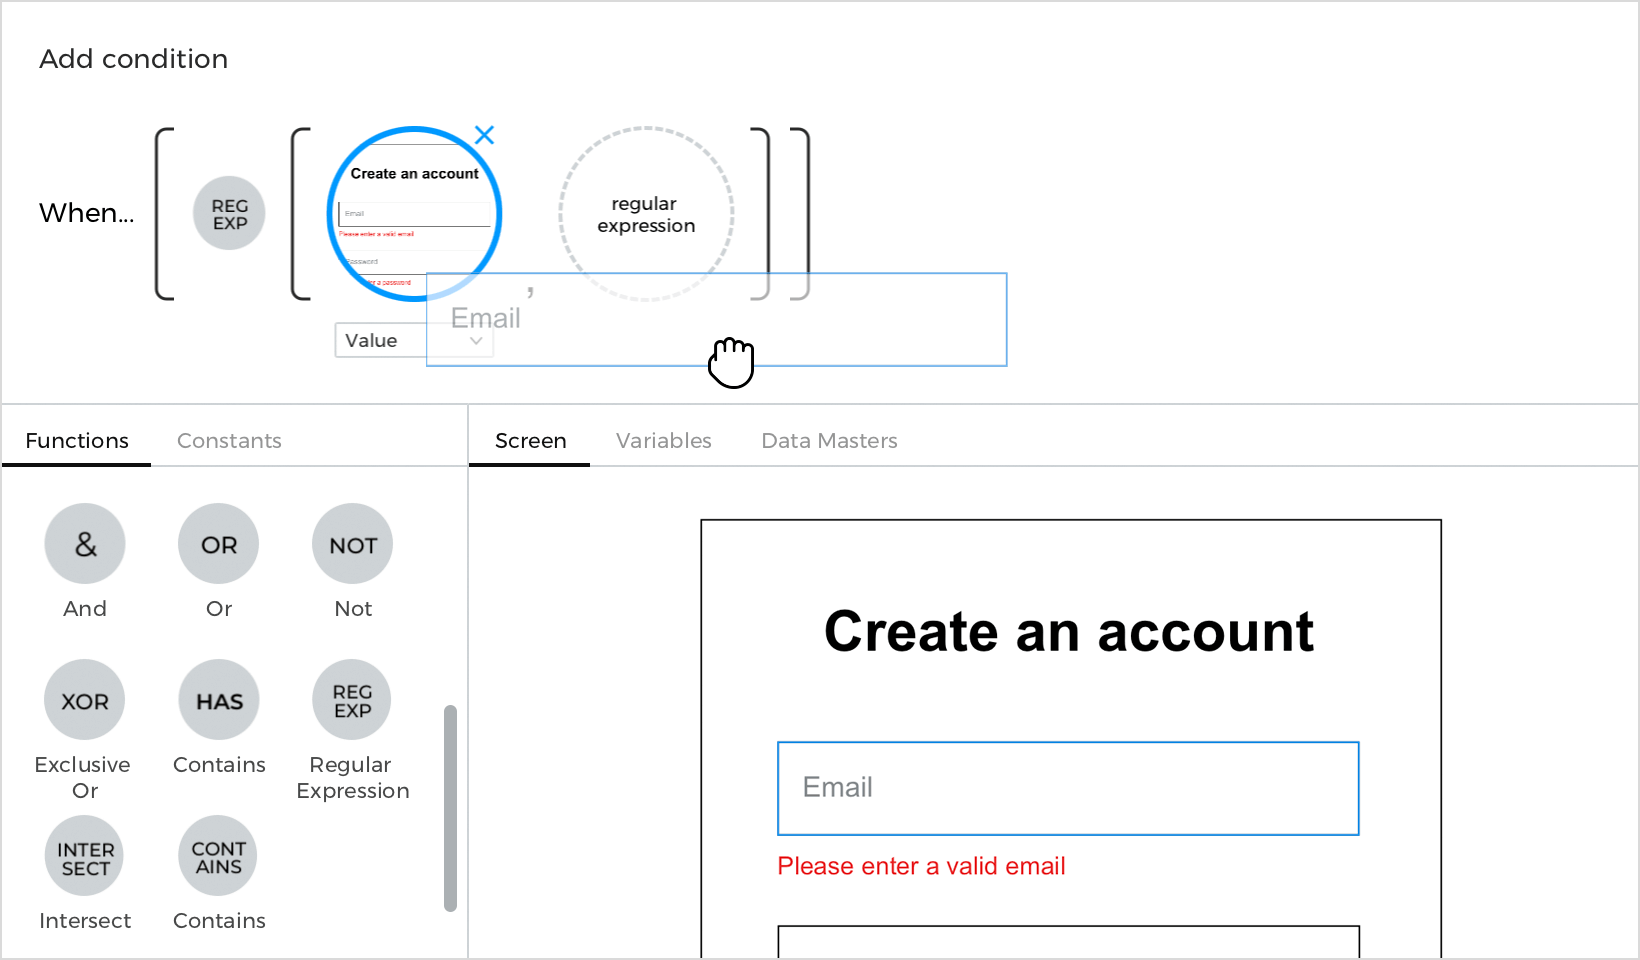 Drag the email input field to the open space on the left